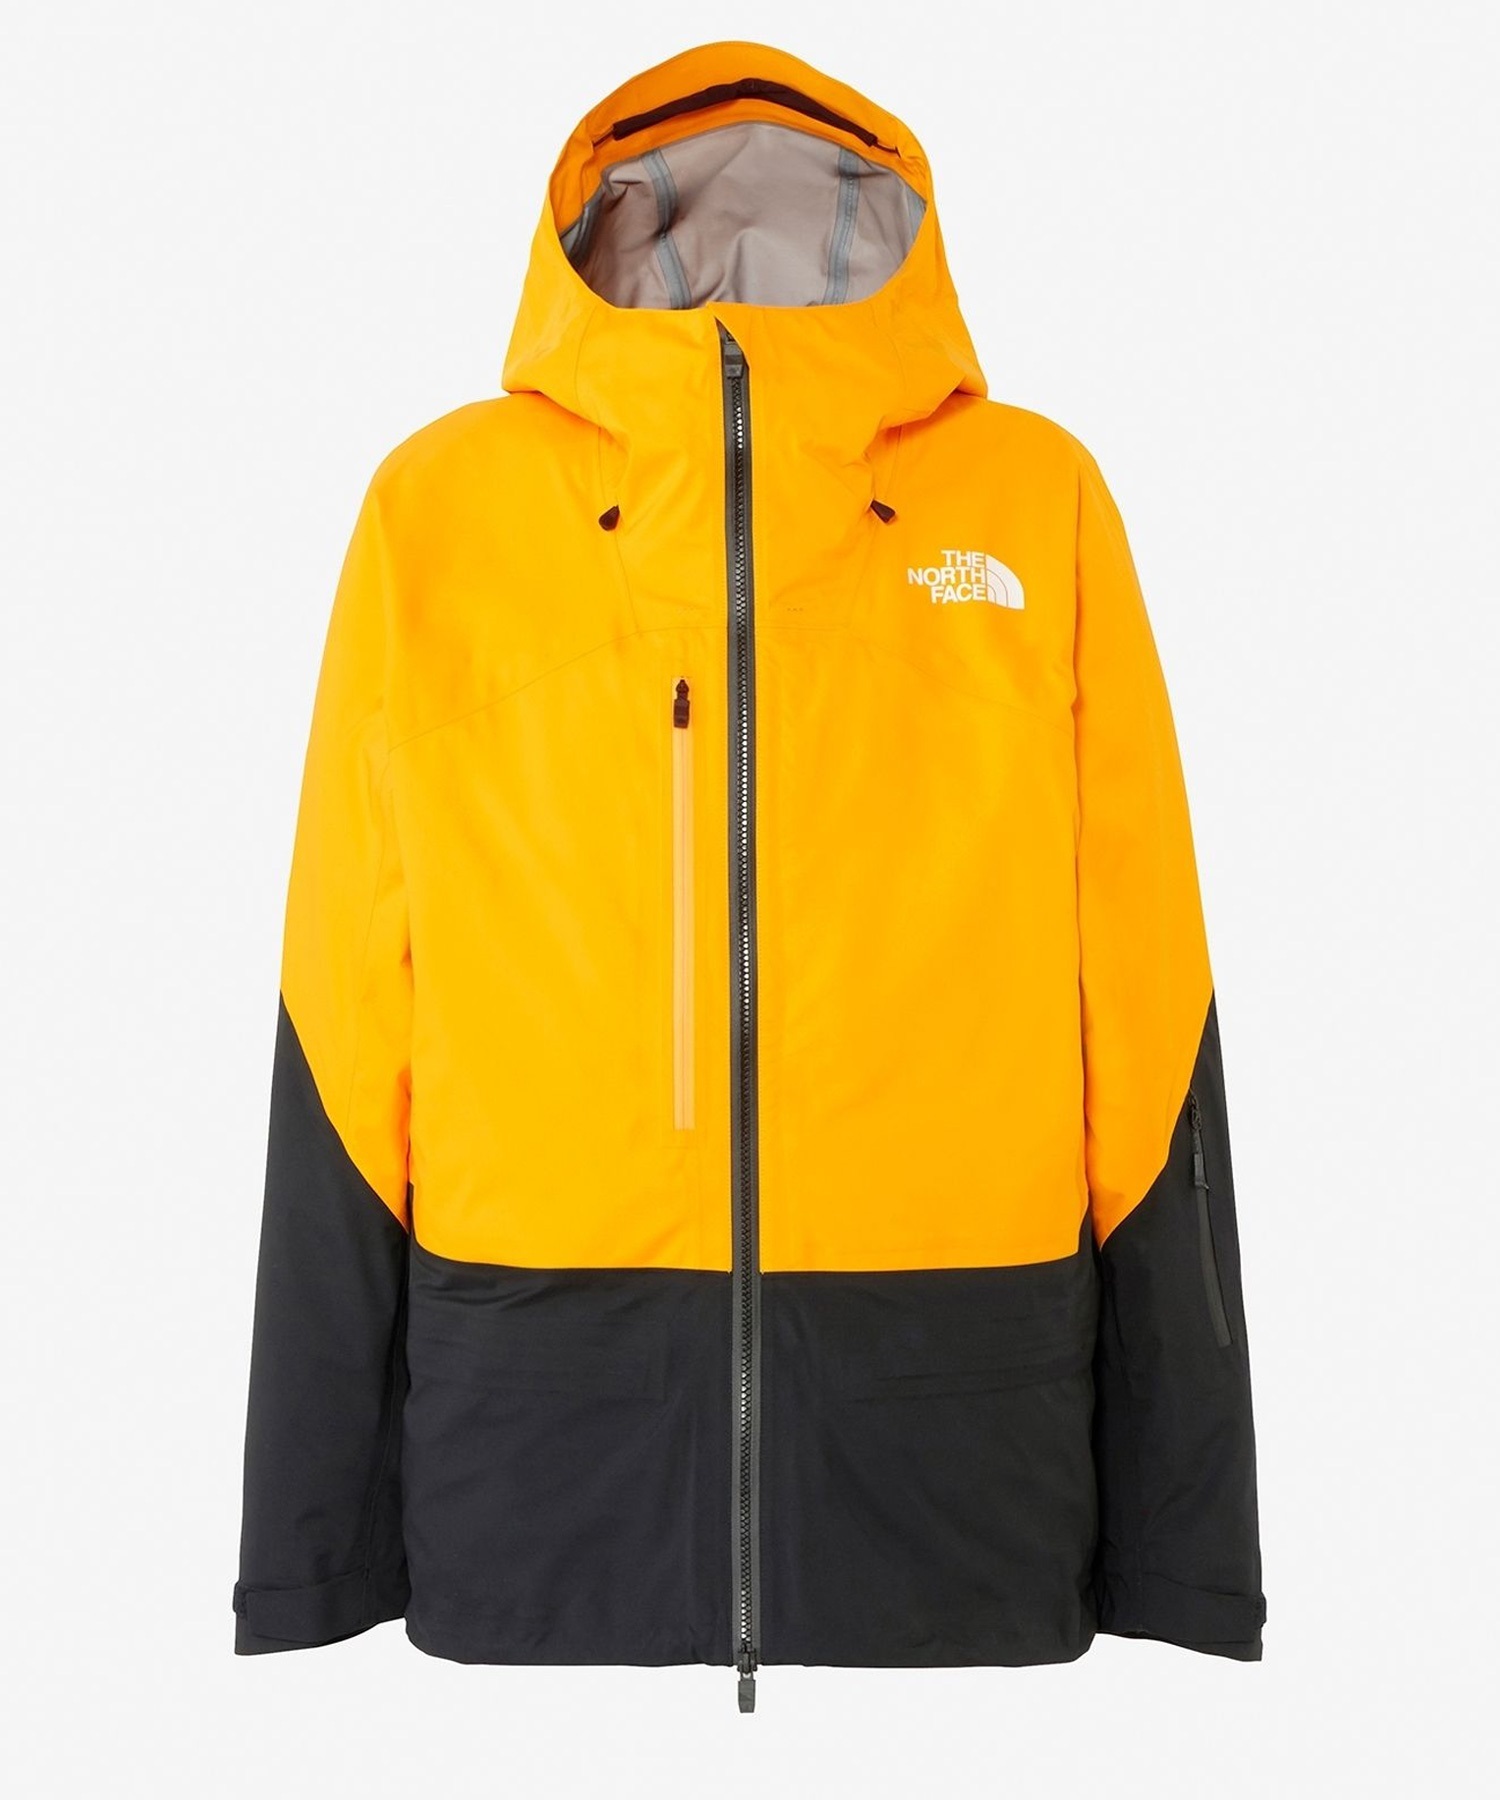 THE NORTH FACE POWDER GUIDE JACKET